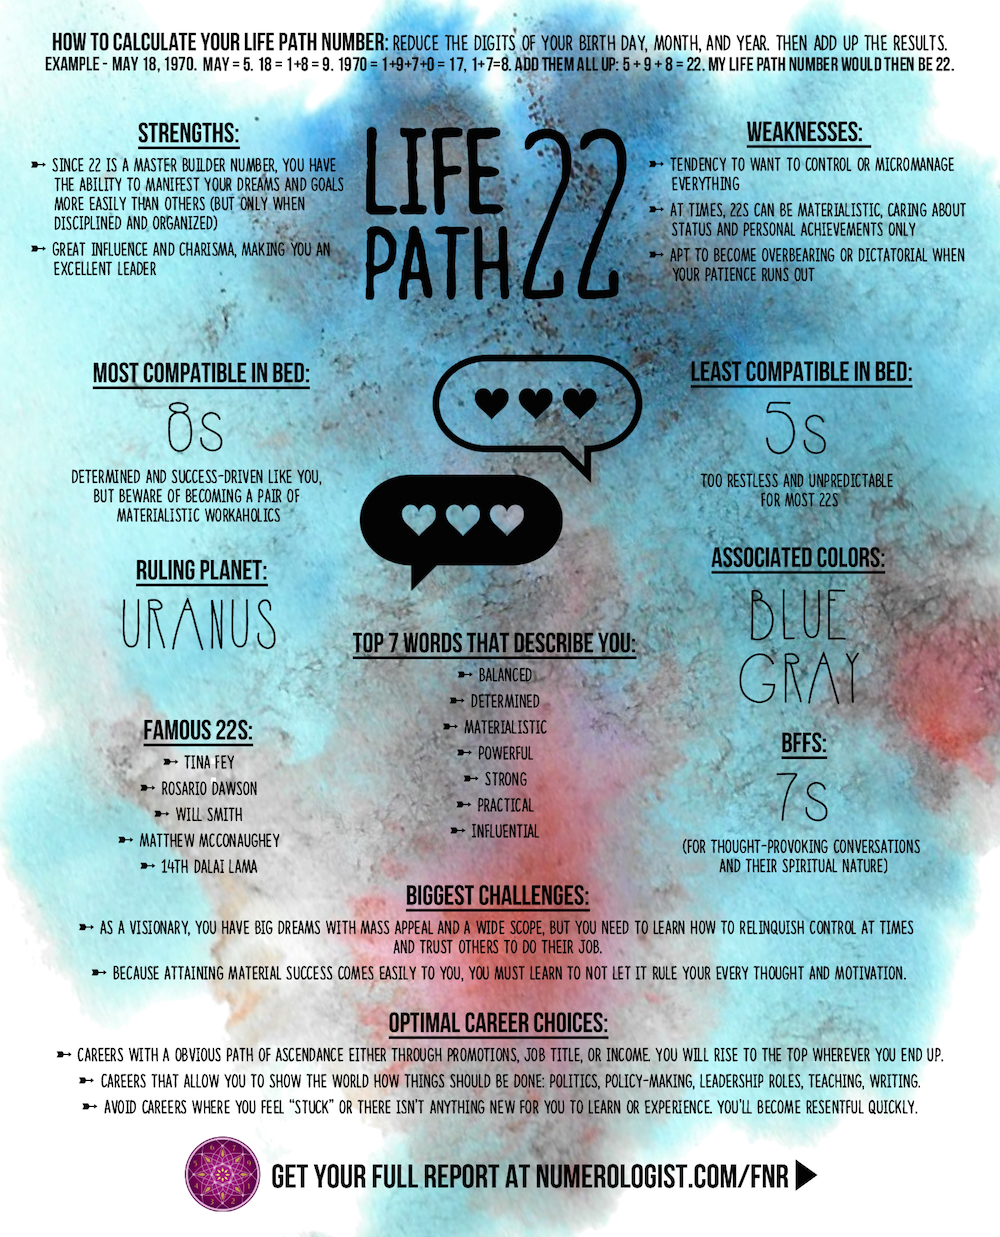 numerology life path number at 12